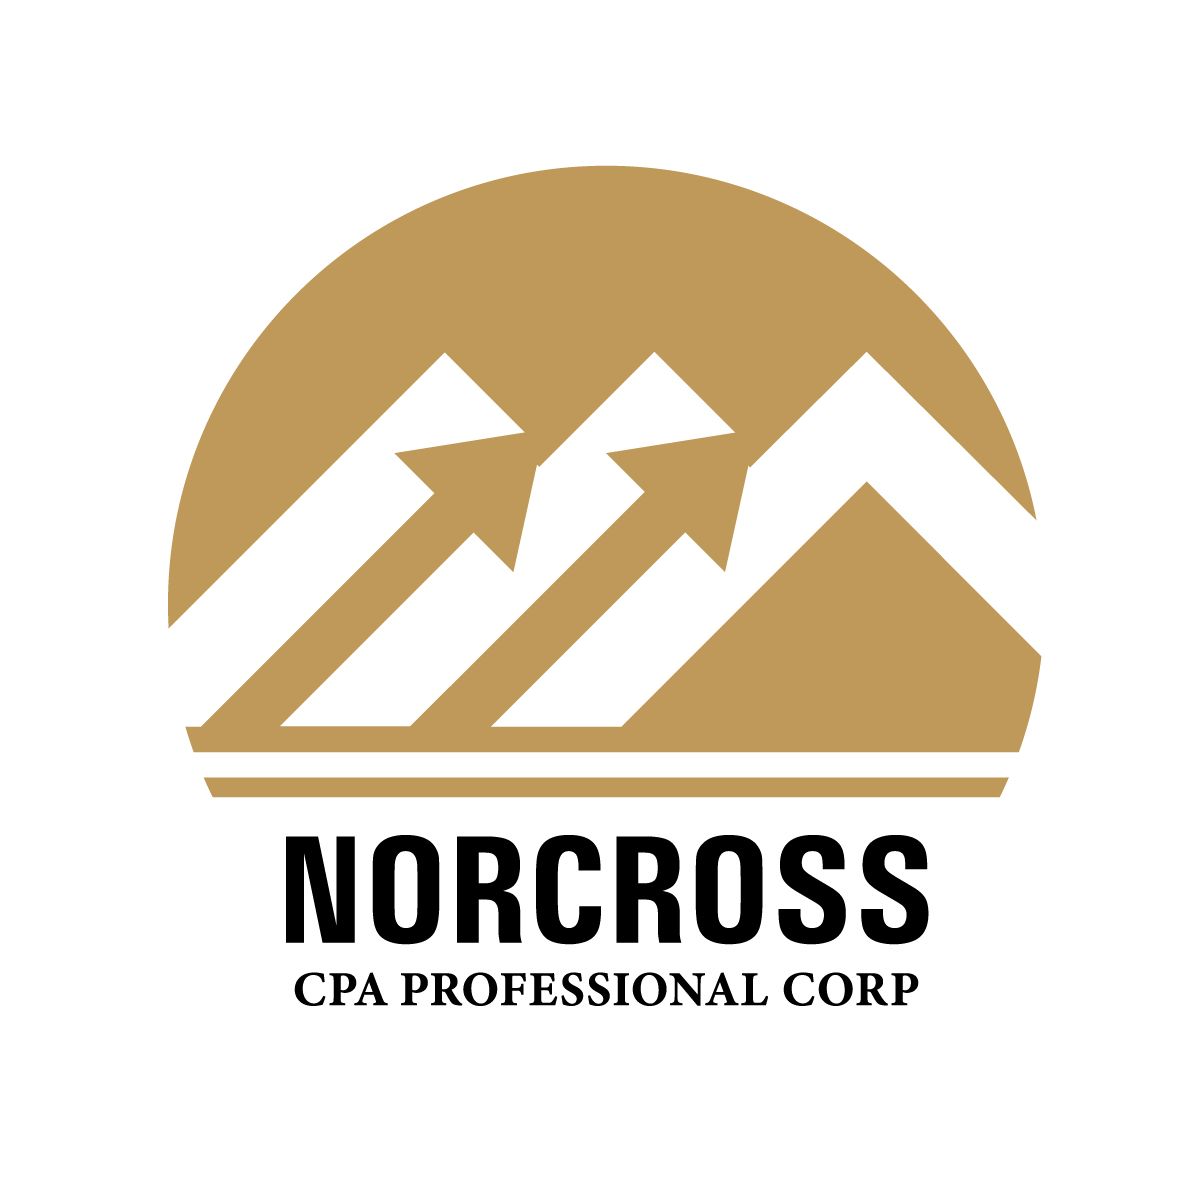 Norcross CPA Professional Corporation